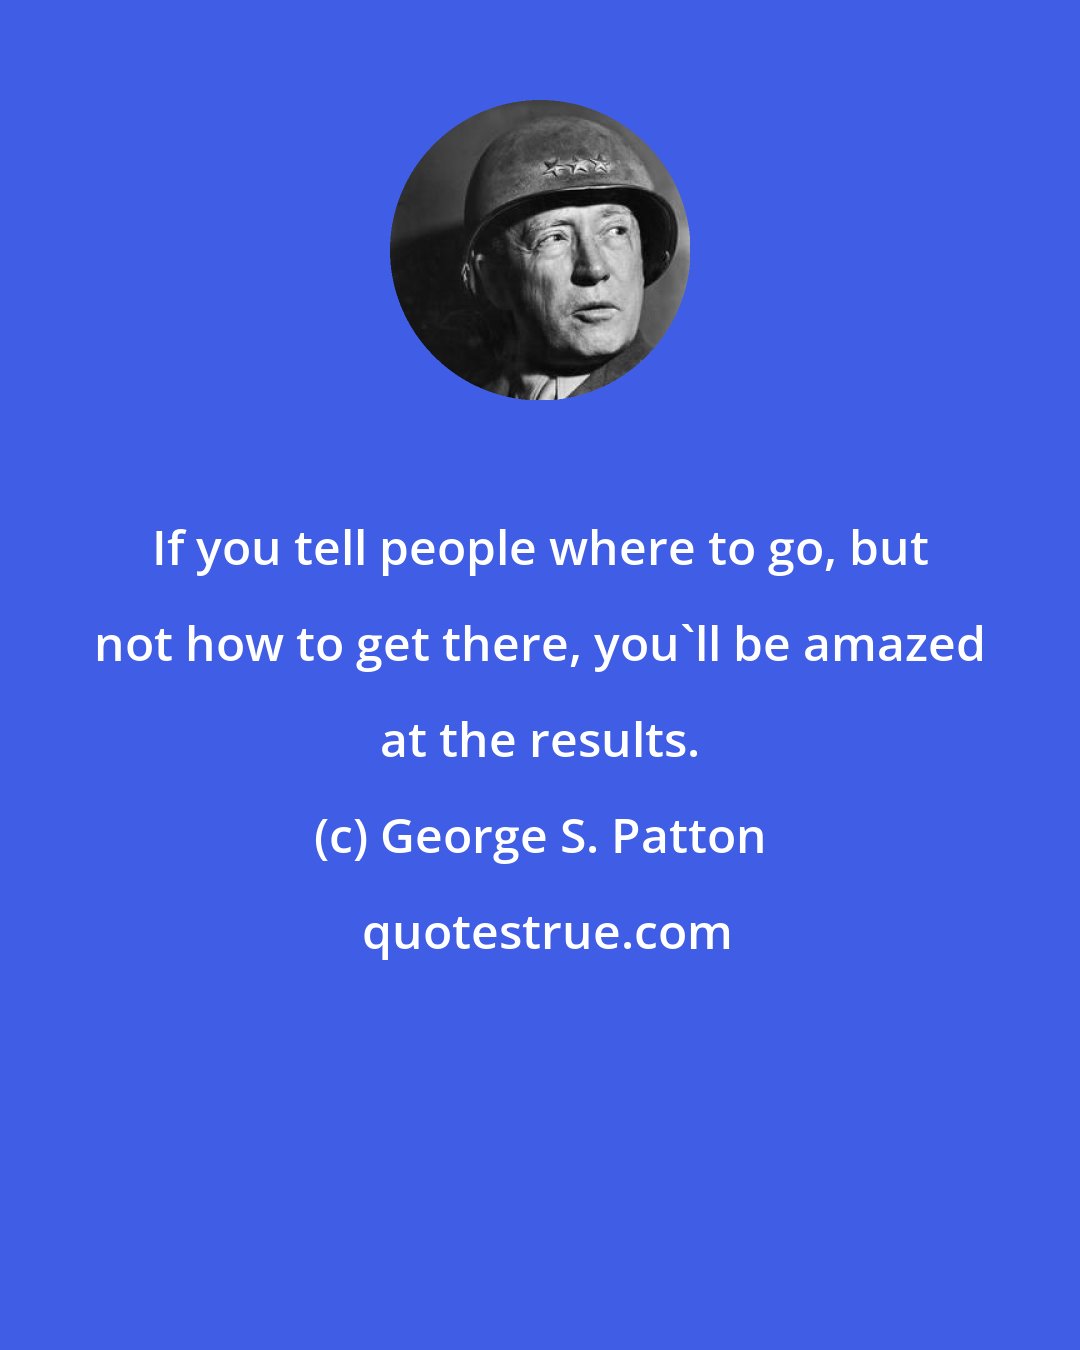 George S. Patton: If you tell people where to go, but not how to get there, you'll be amazed at the results.